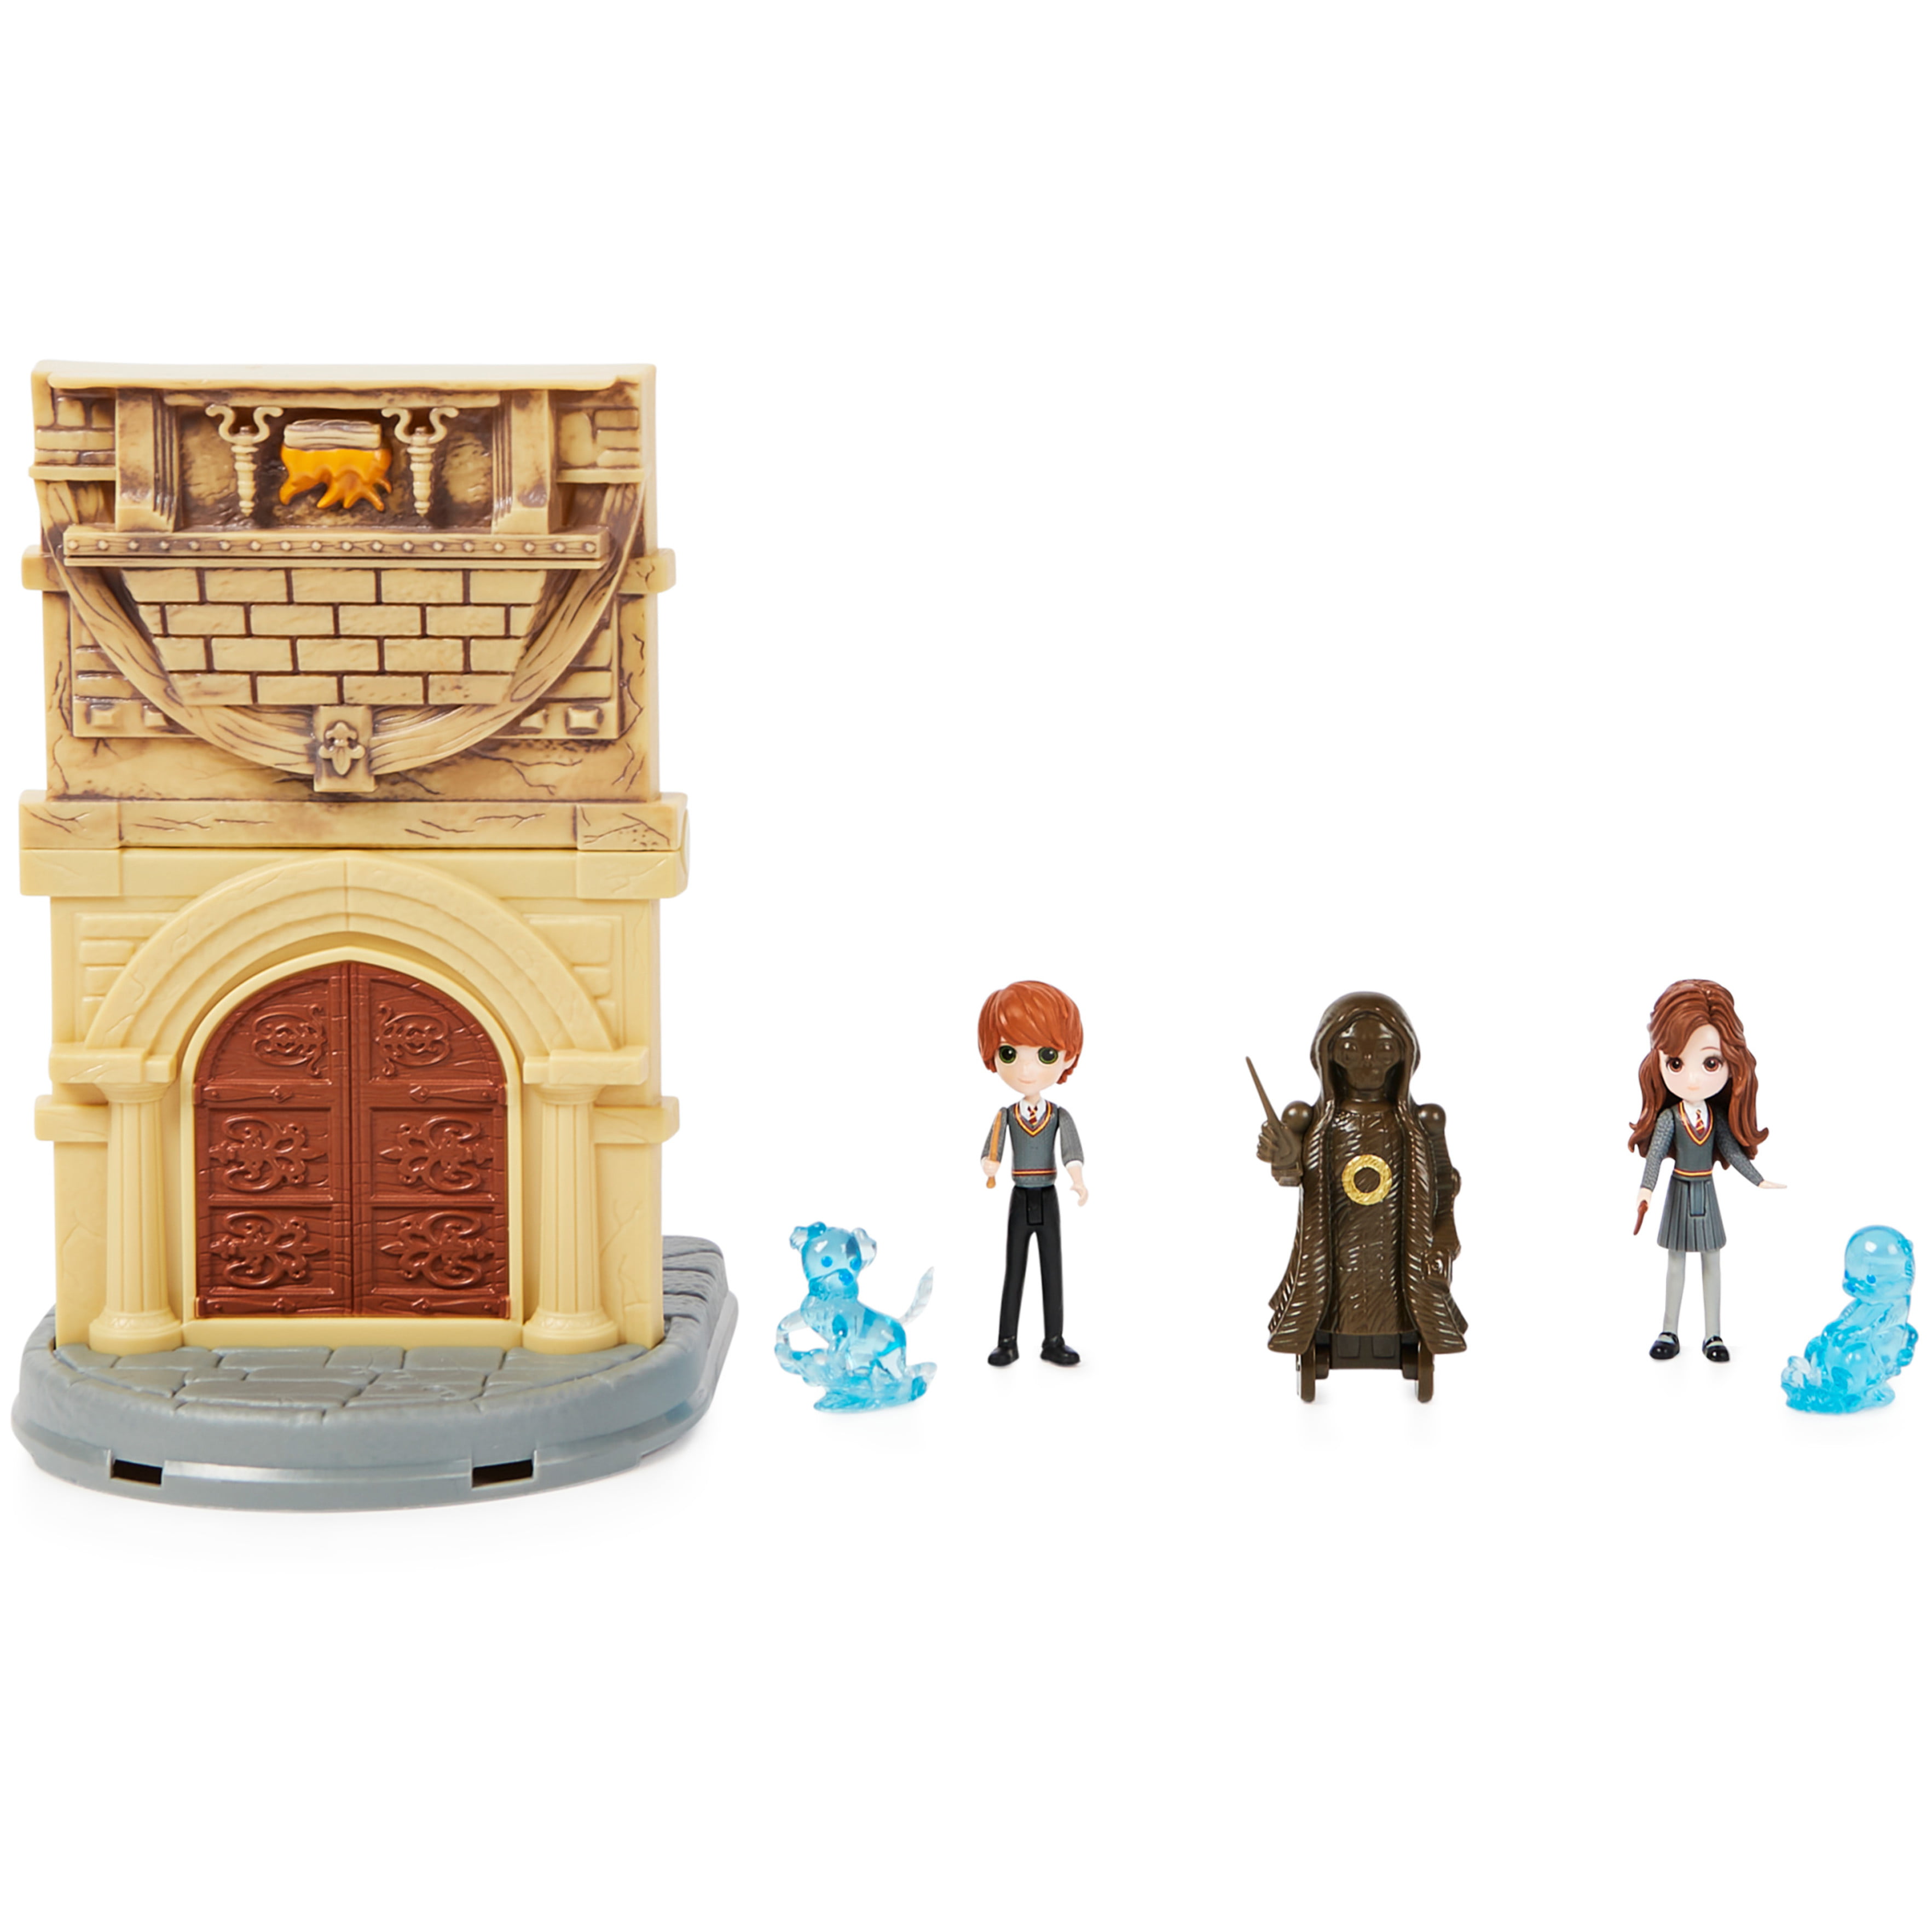  Harry Potter Hogwarts Great Hall Mini Playset with 5  Interactive Features, 4 Mini Figures, Podium, Goblet, Plus Works with  Wizard Training Wands (Sold Separately) : Toys & Games